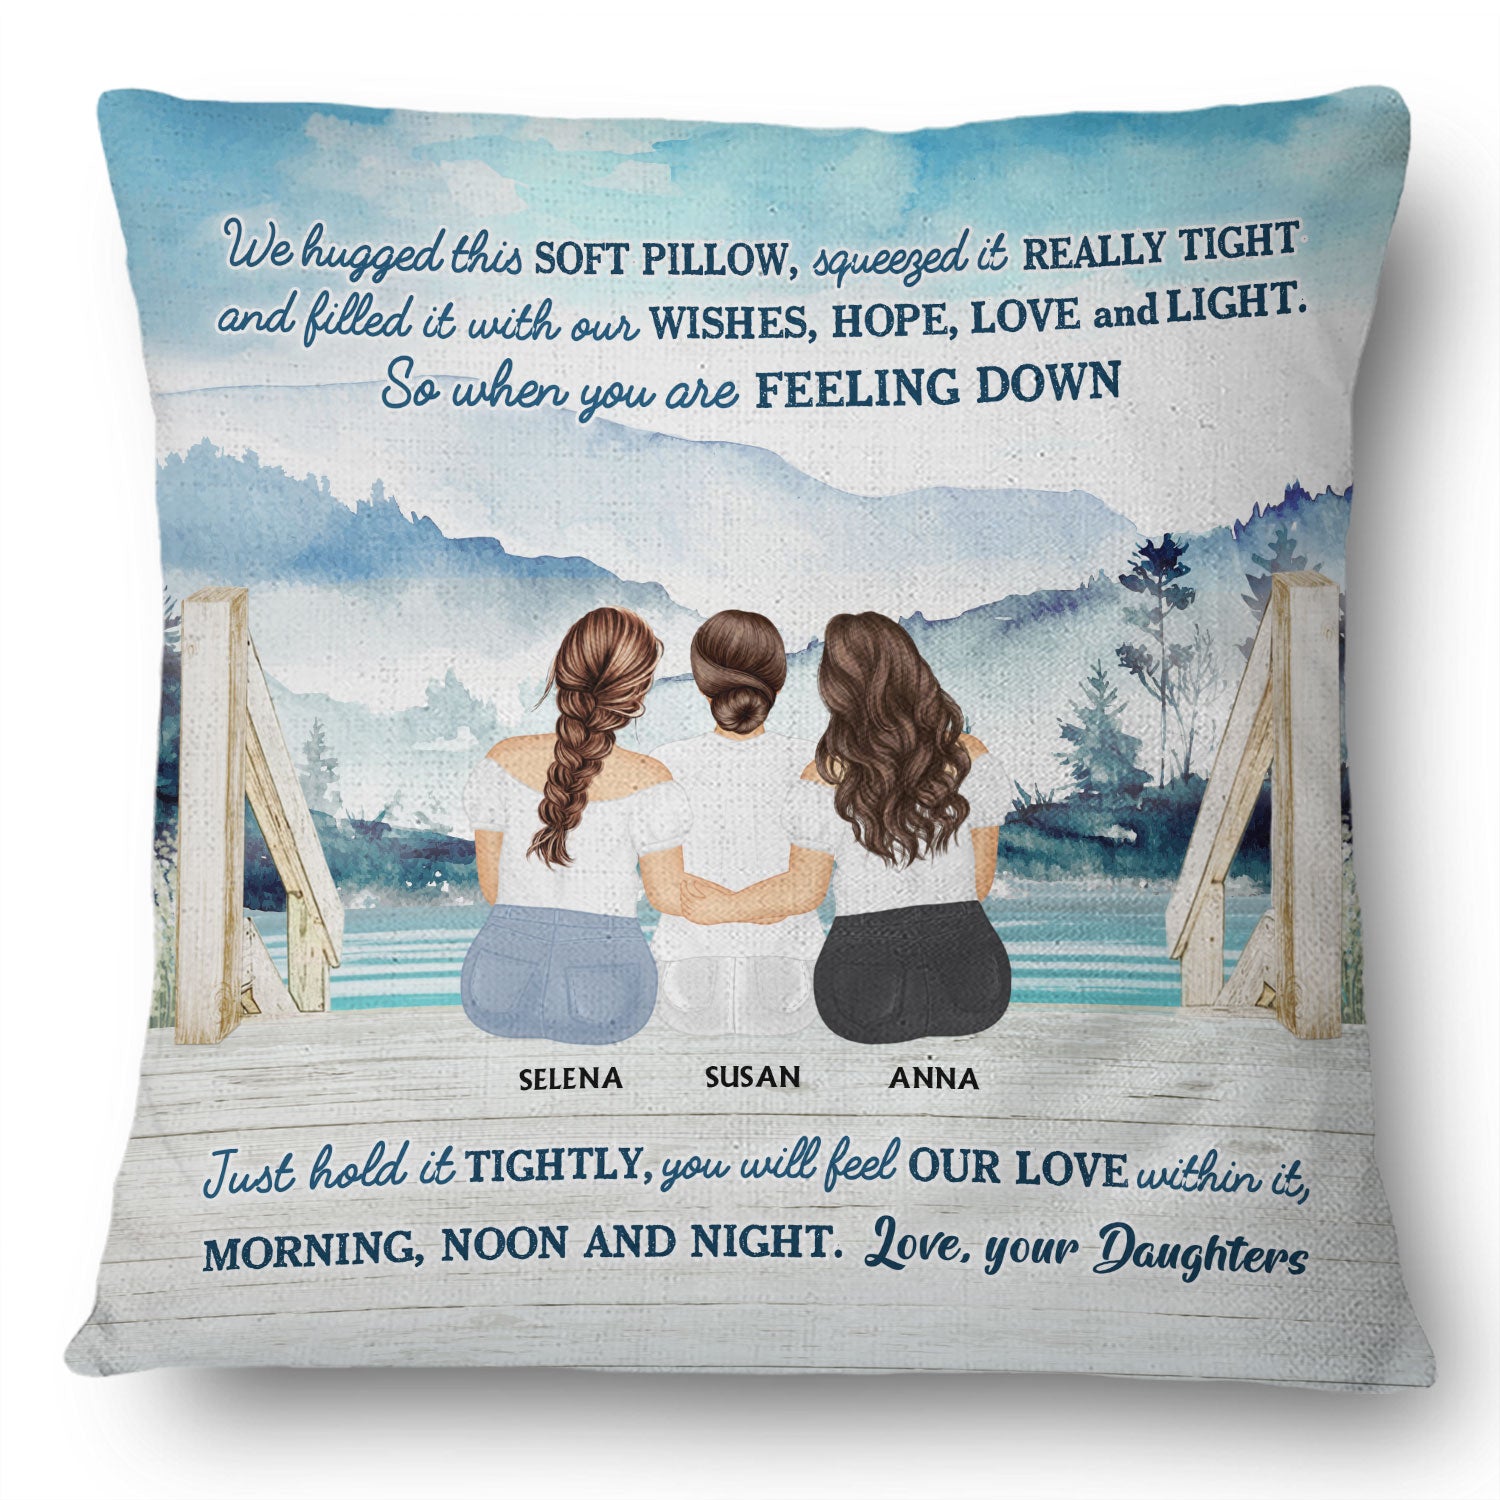 Lake Mother And Daughters Hugged This Soft Pillow - Personalized Custom Pillow